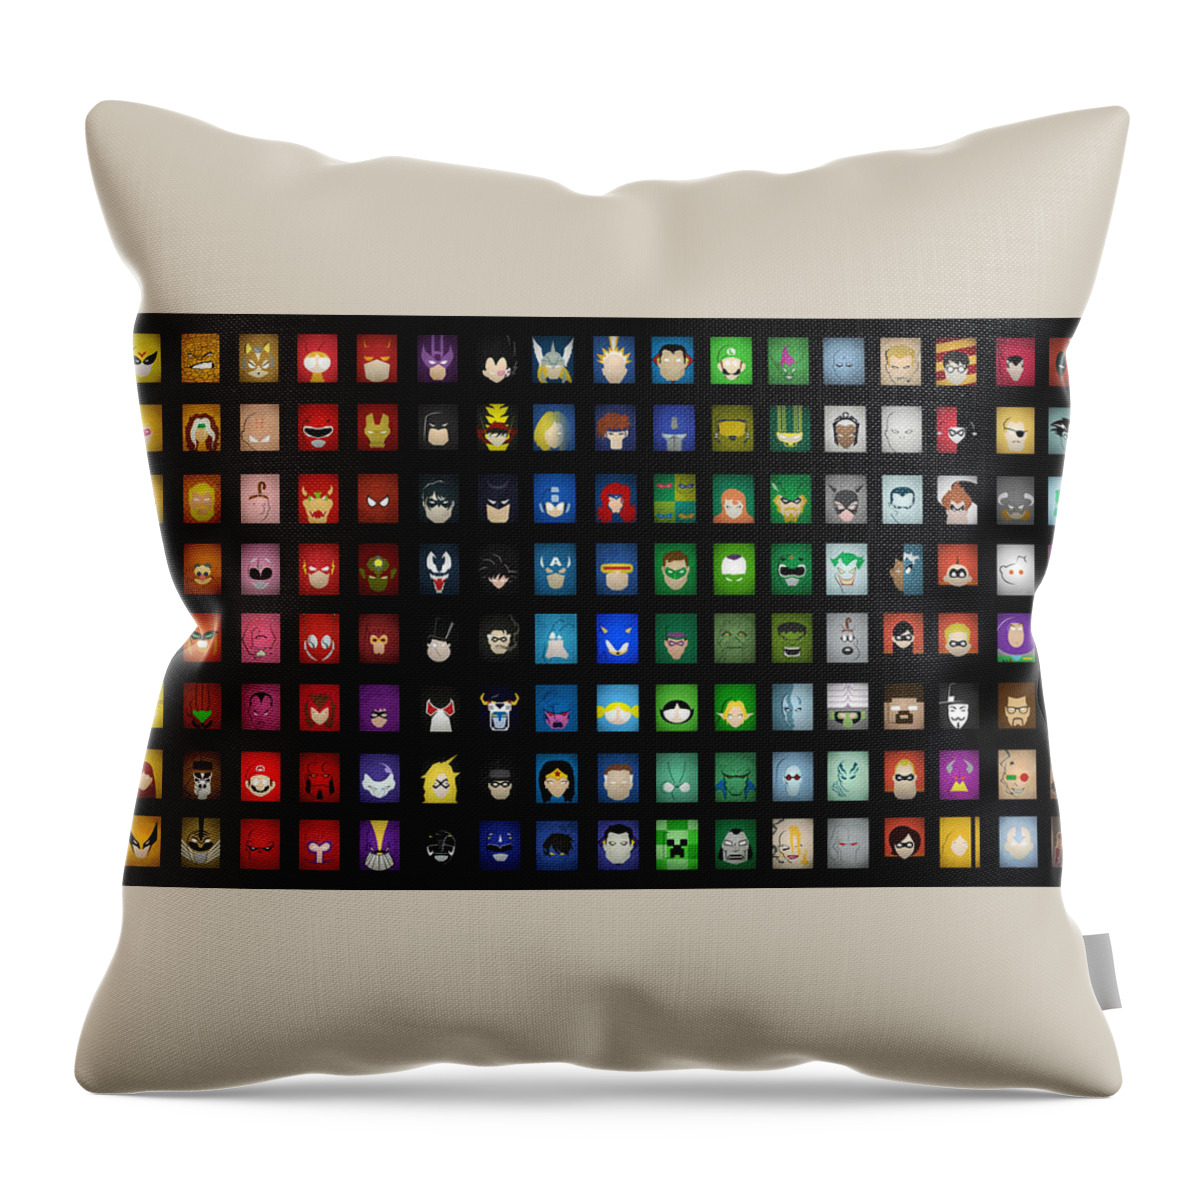 Collage Throw Pillow featuring the digital art Collage by Super Lovely